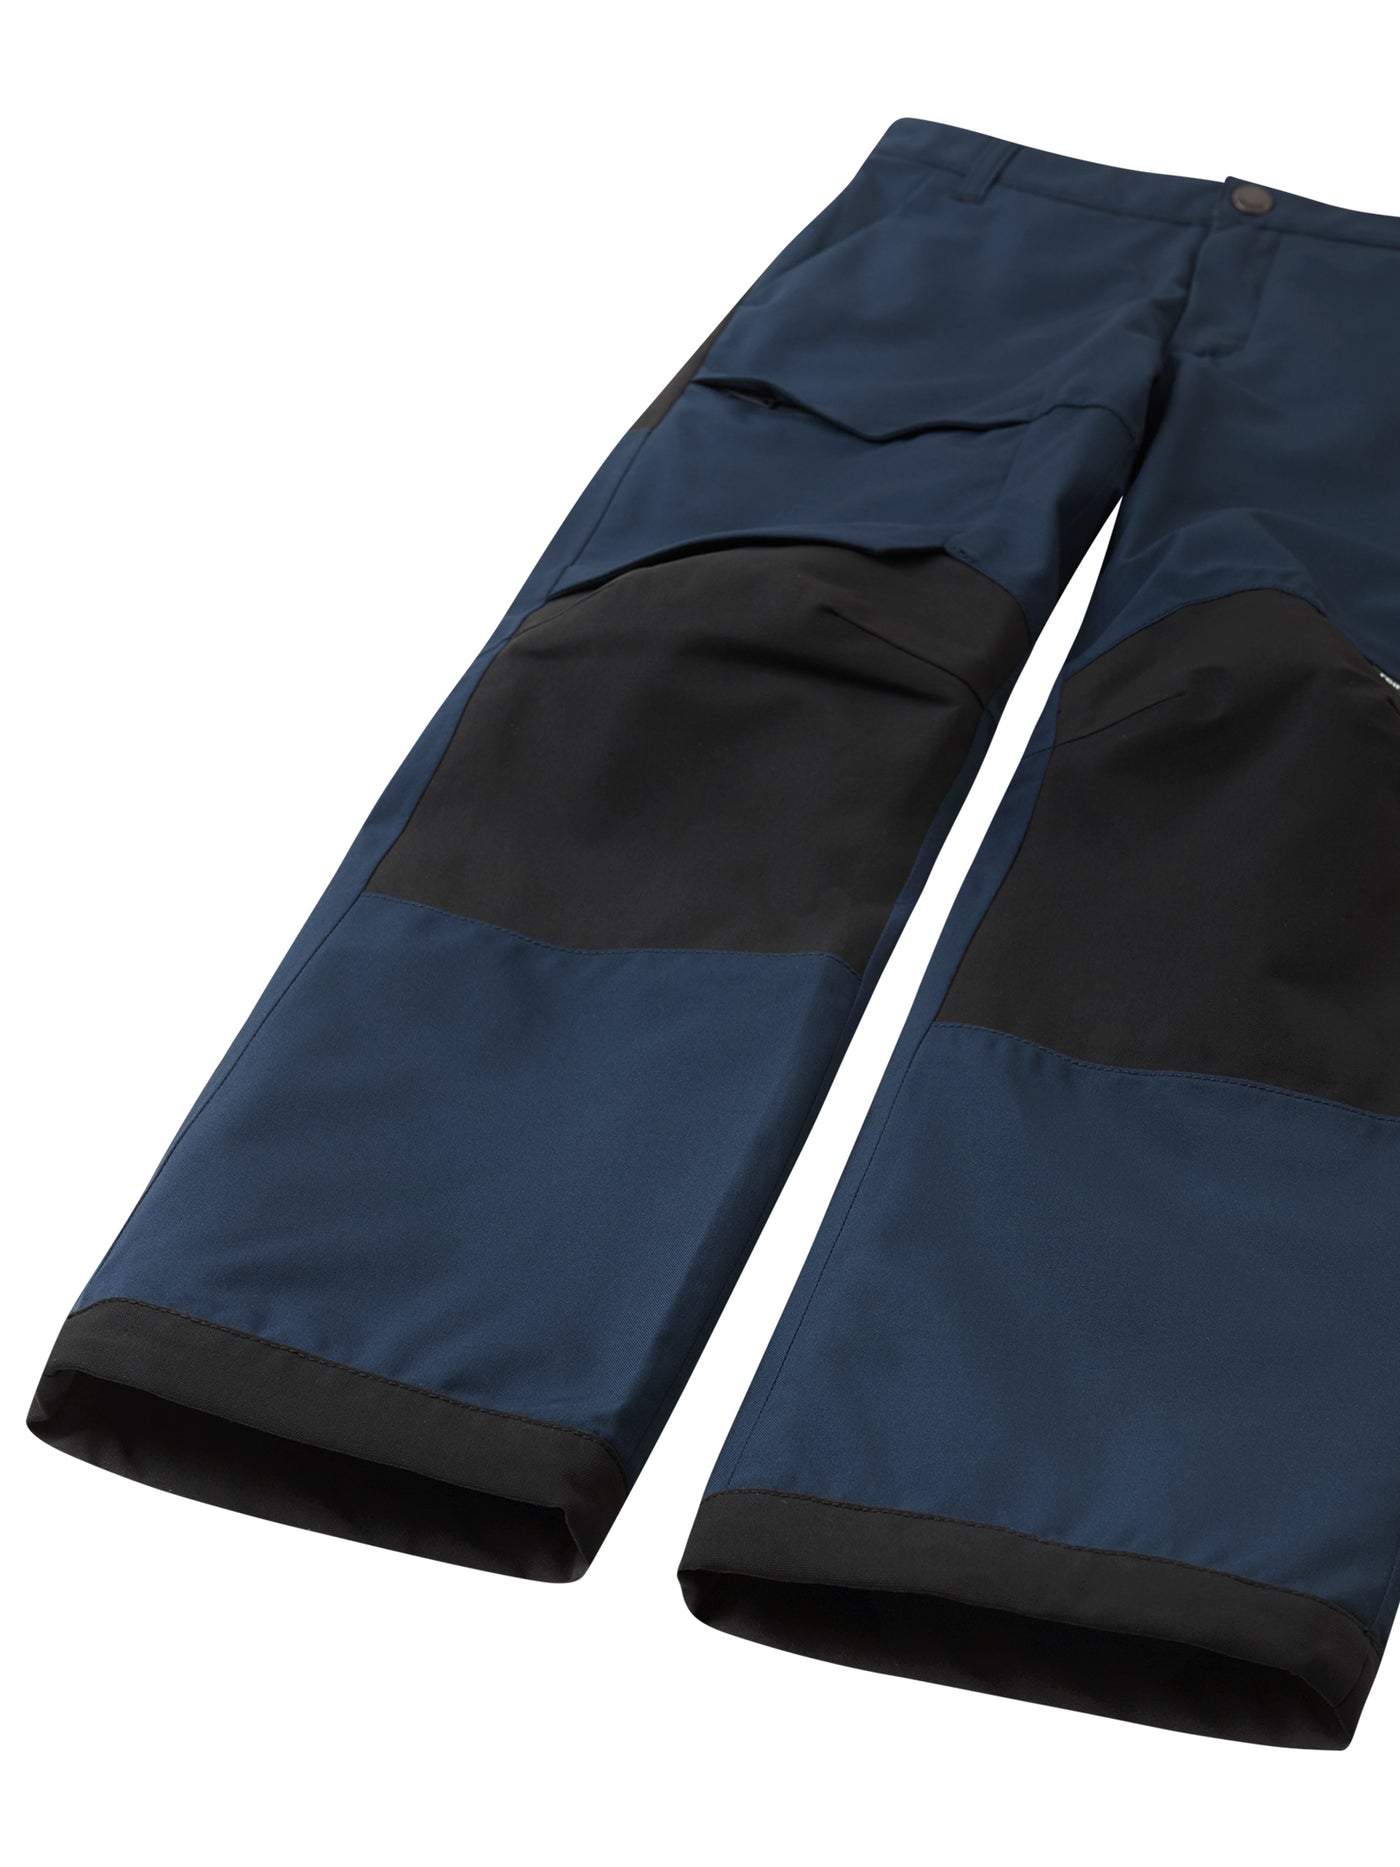 Sampu Pants - Shell pants for children and young people